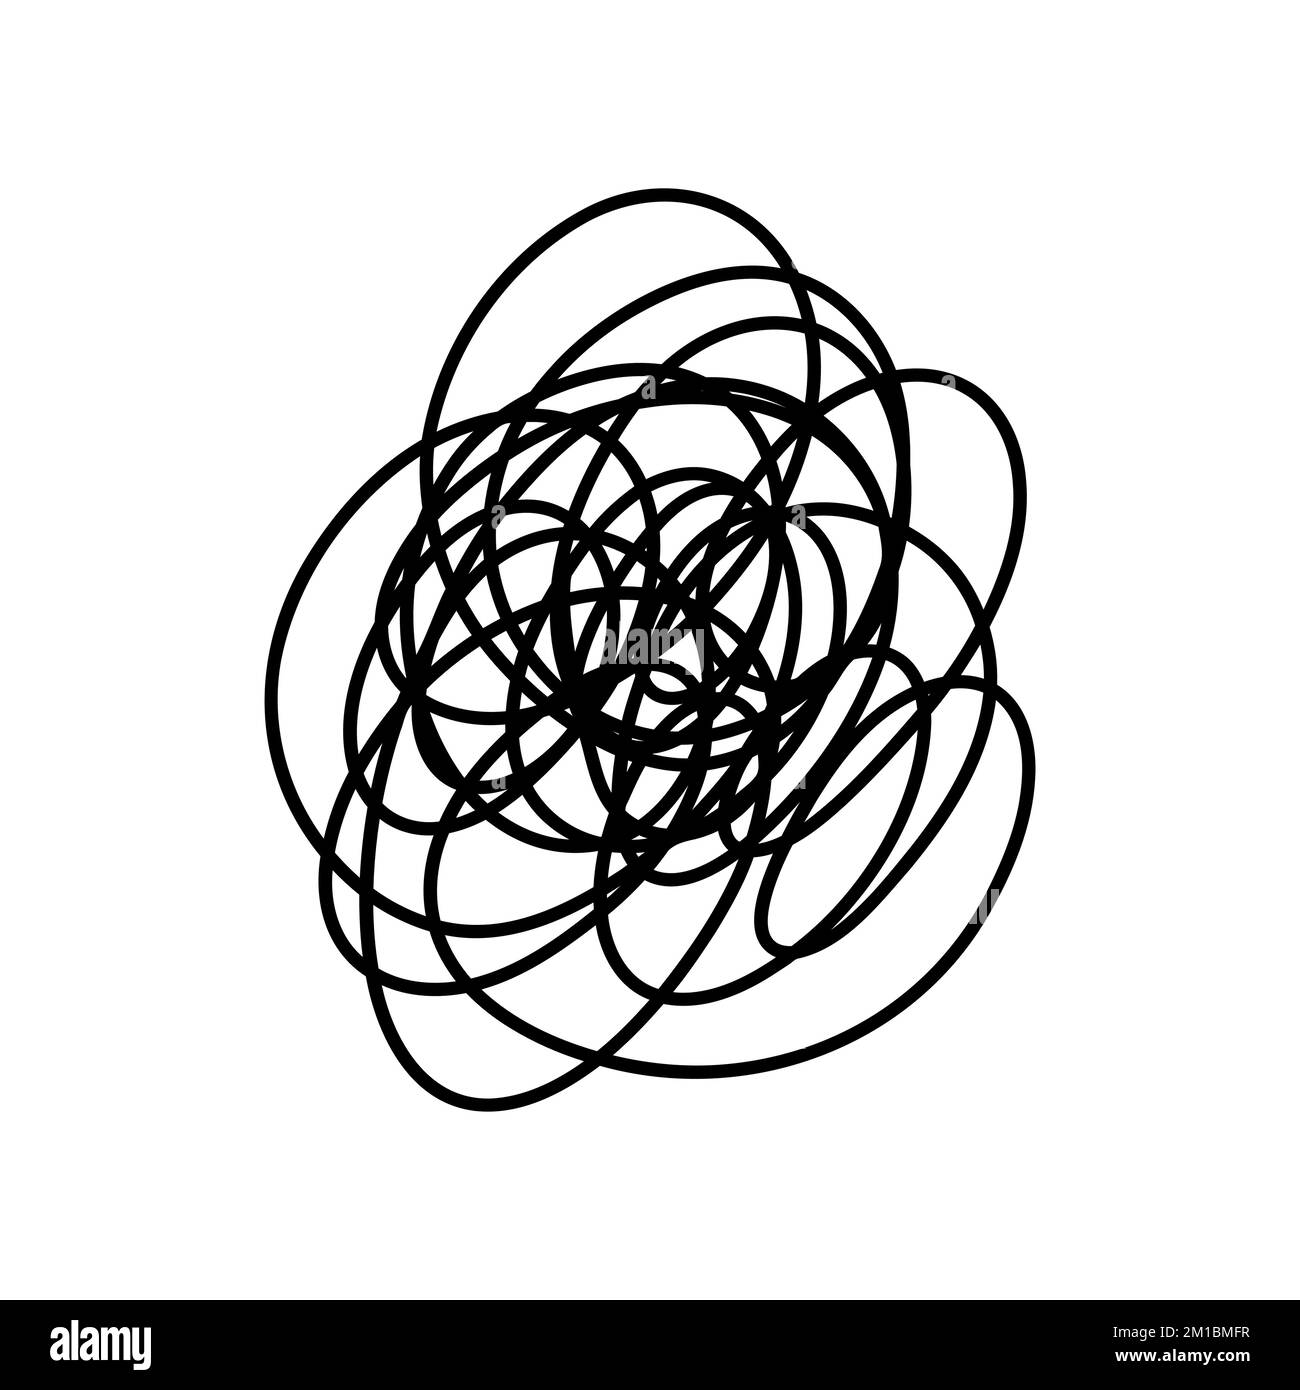 Complex line. Complicated way. Messy ball concept. Loading idea vector process. Stock Vector